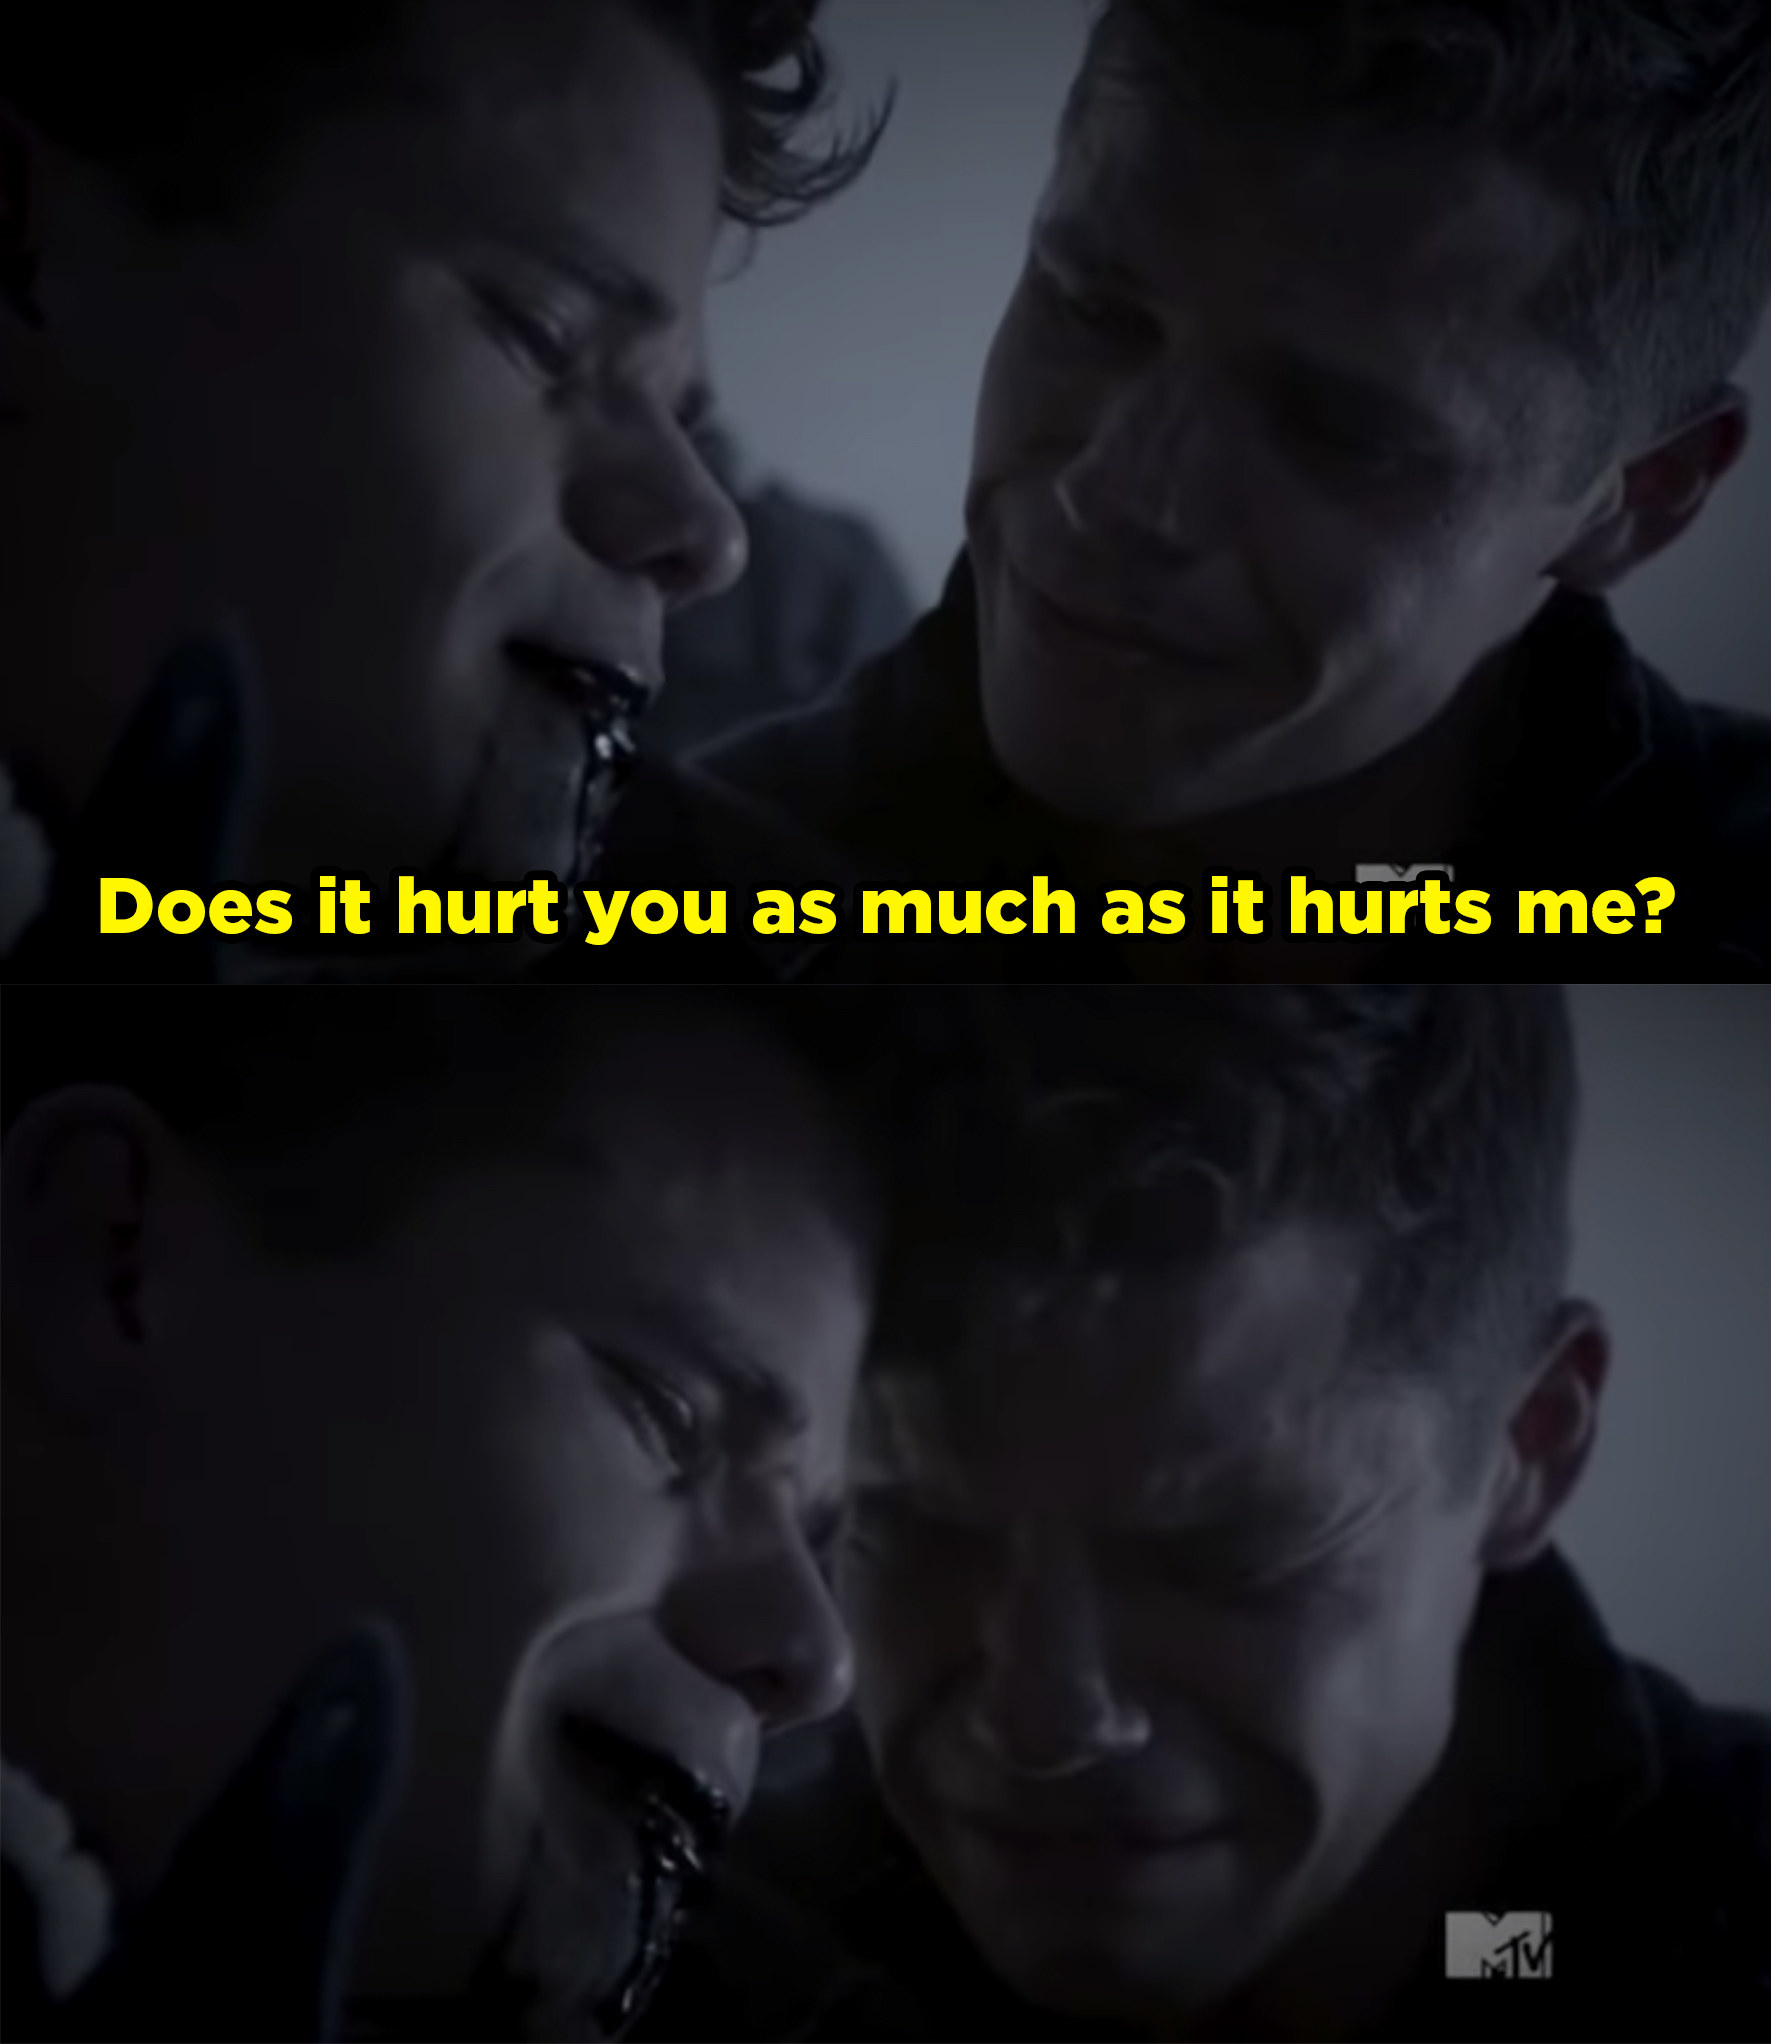 Aiden is crying and bleeding from his mouth. His twin brother Ethan is holding him crying, and Aiden says, &quot;Does this hurt you as much as it hurts me?&quot;